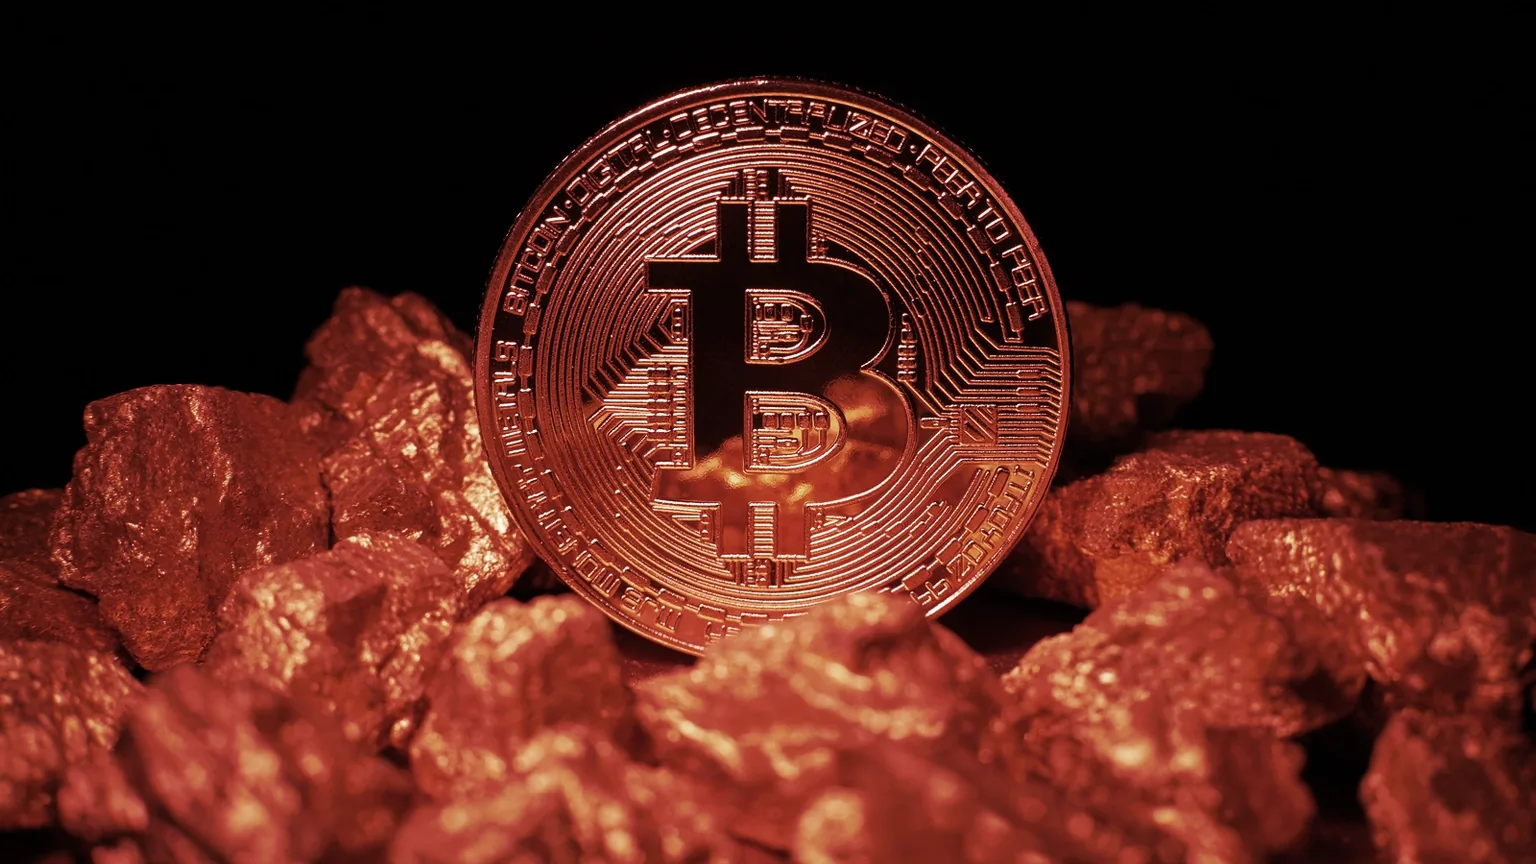 Bitcoin on top of gold. Image: Shutterstock